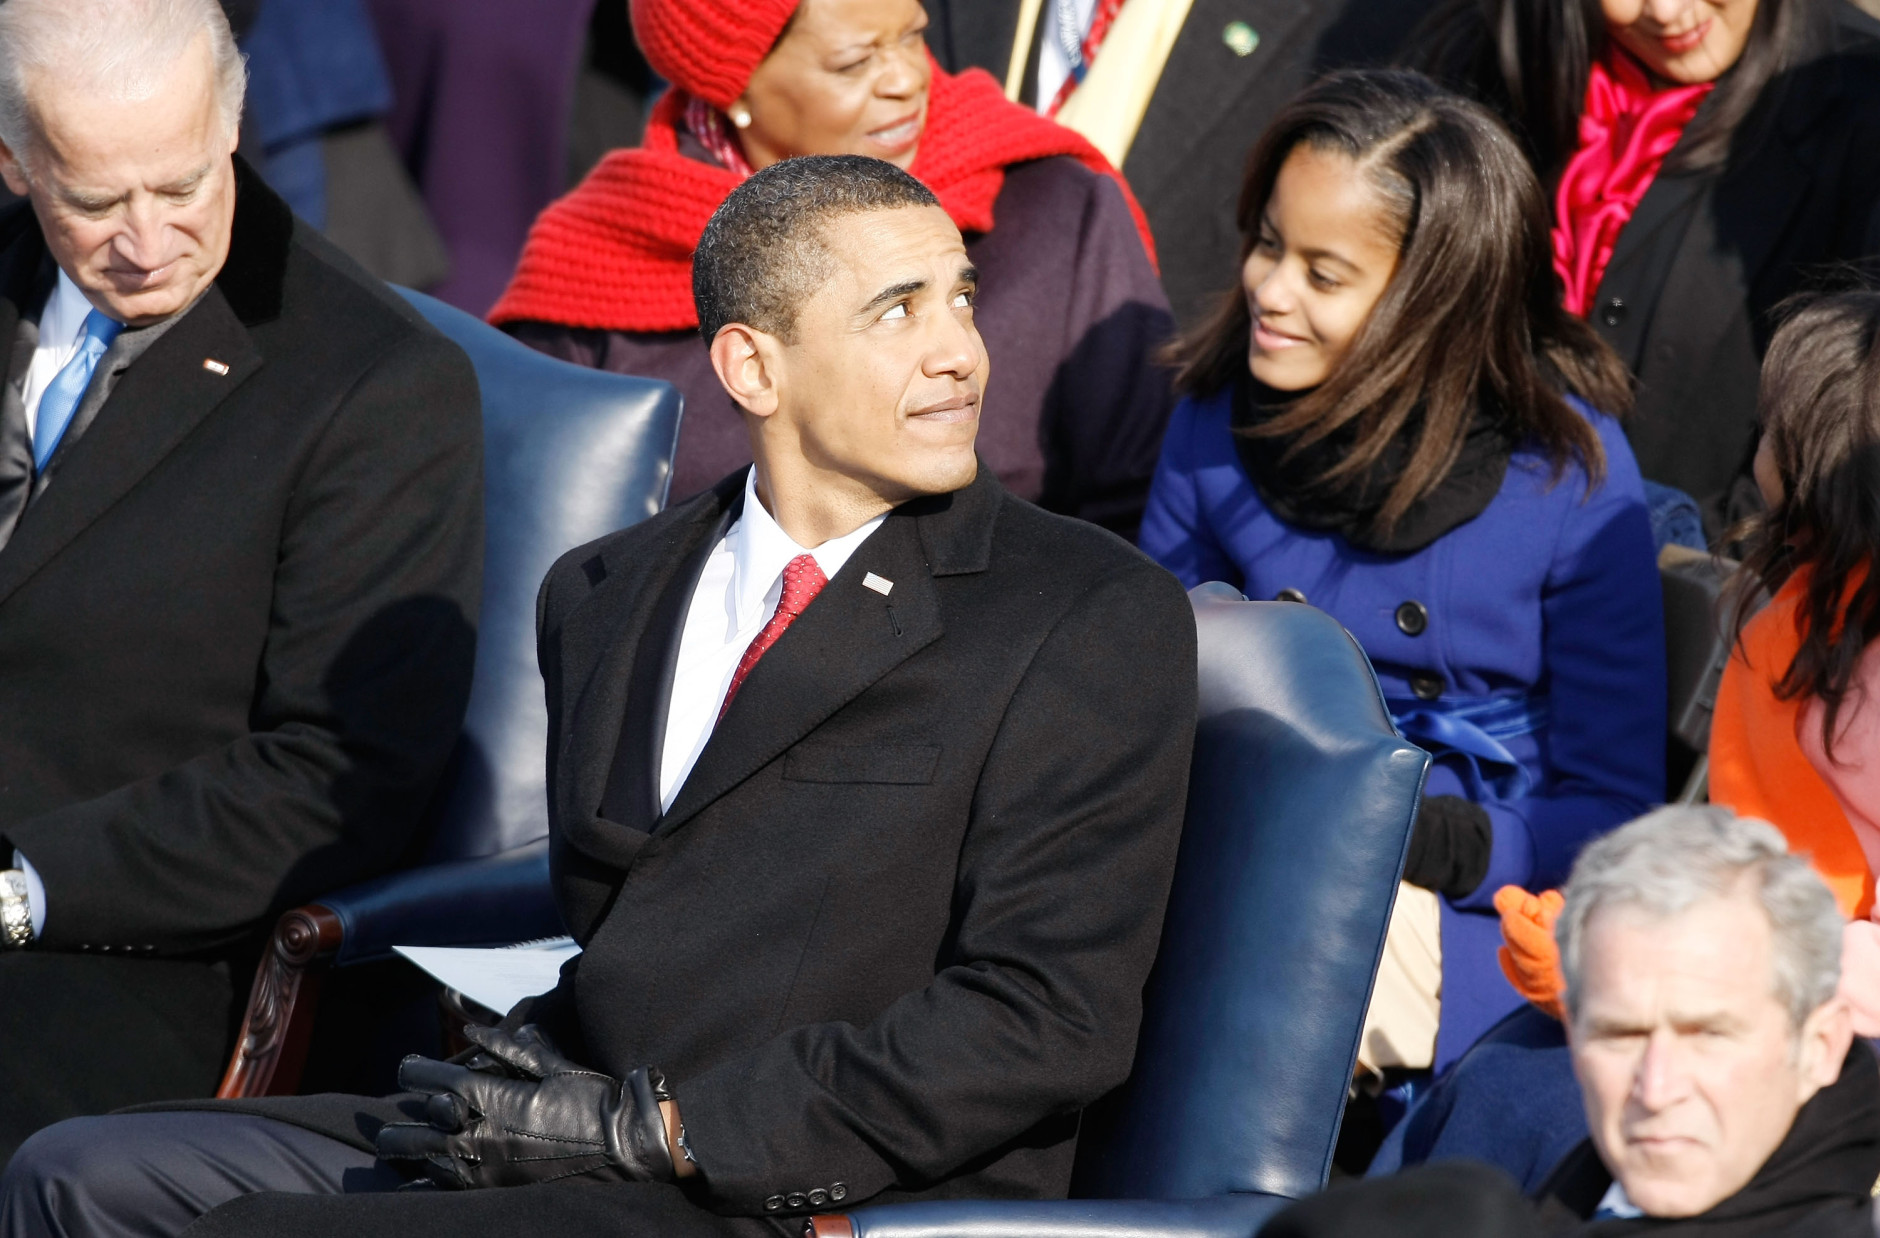 WASHINGTON - JANUARY 20:  President-elect Barack Obama looks back during his inauguration as his daughter Malia looks on  January 20, 2009 in Washington, DC. Obama becomes the first African-American to be elected to the office of President in the history of the United States.  (Photo by Chip Somodevilla/Getty Images)